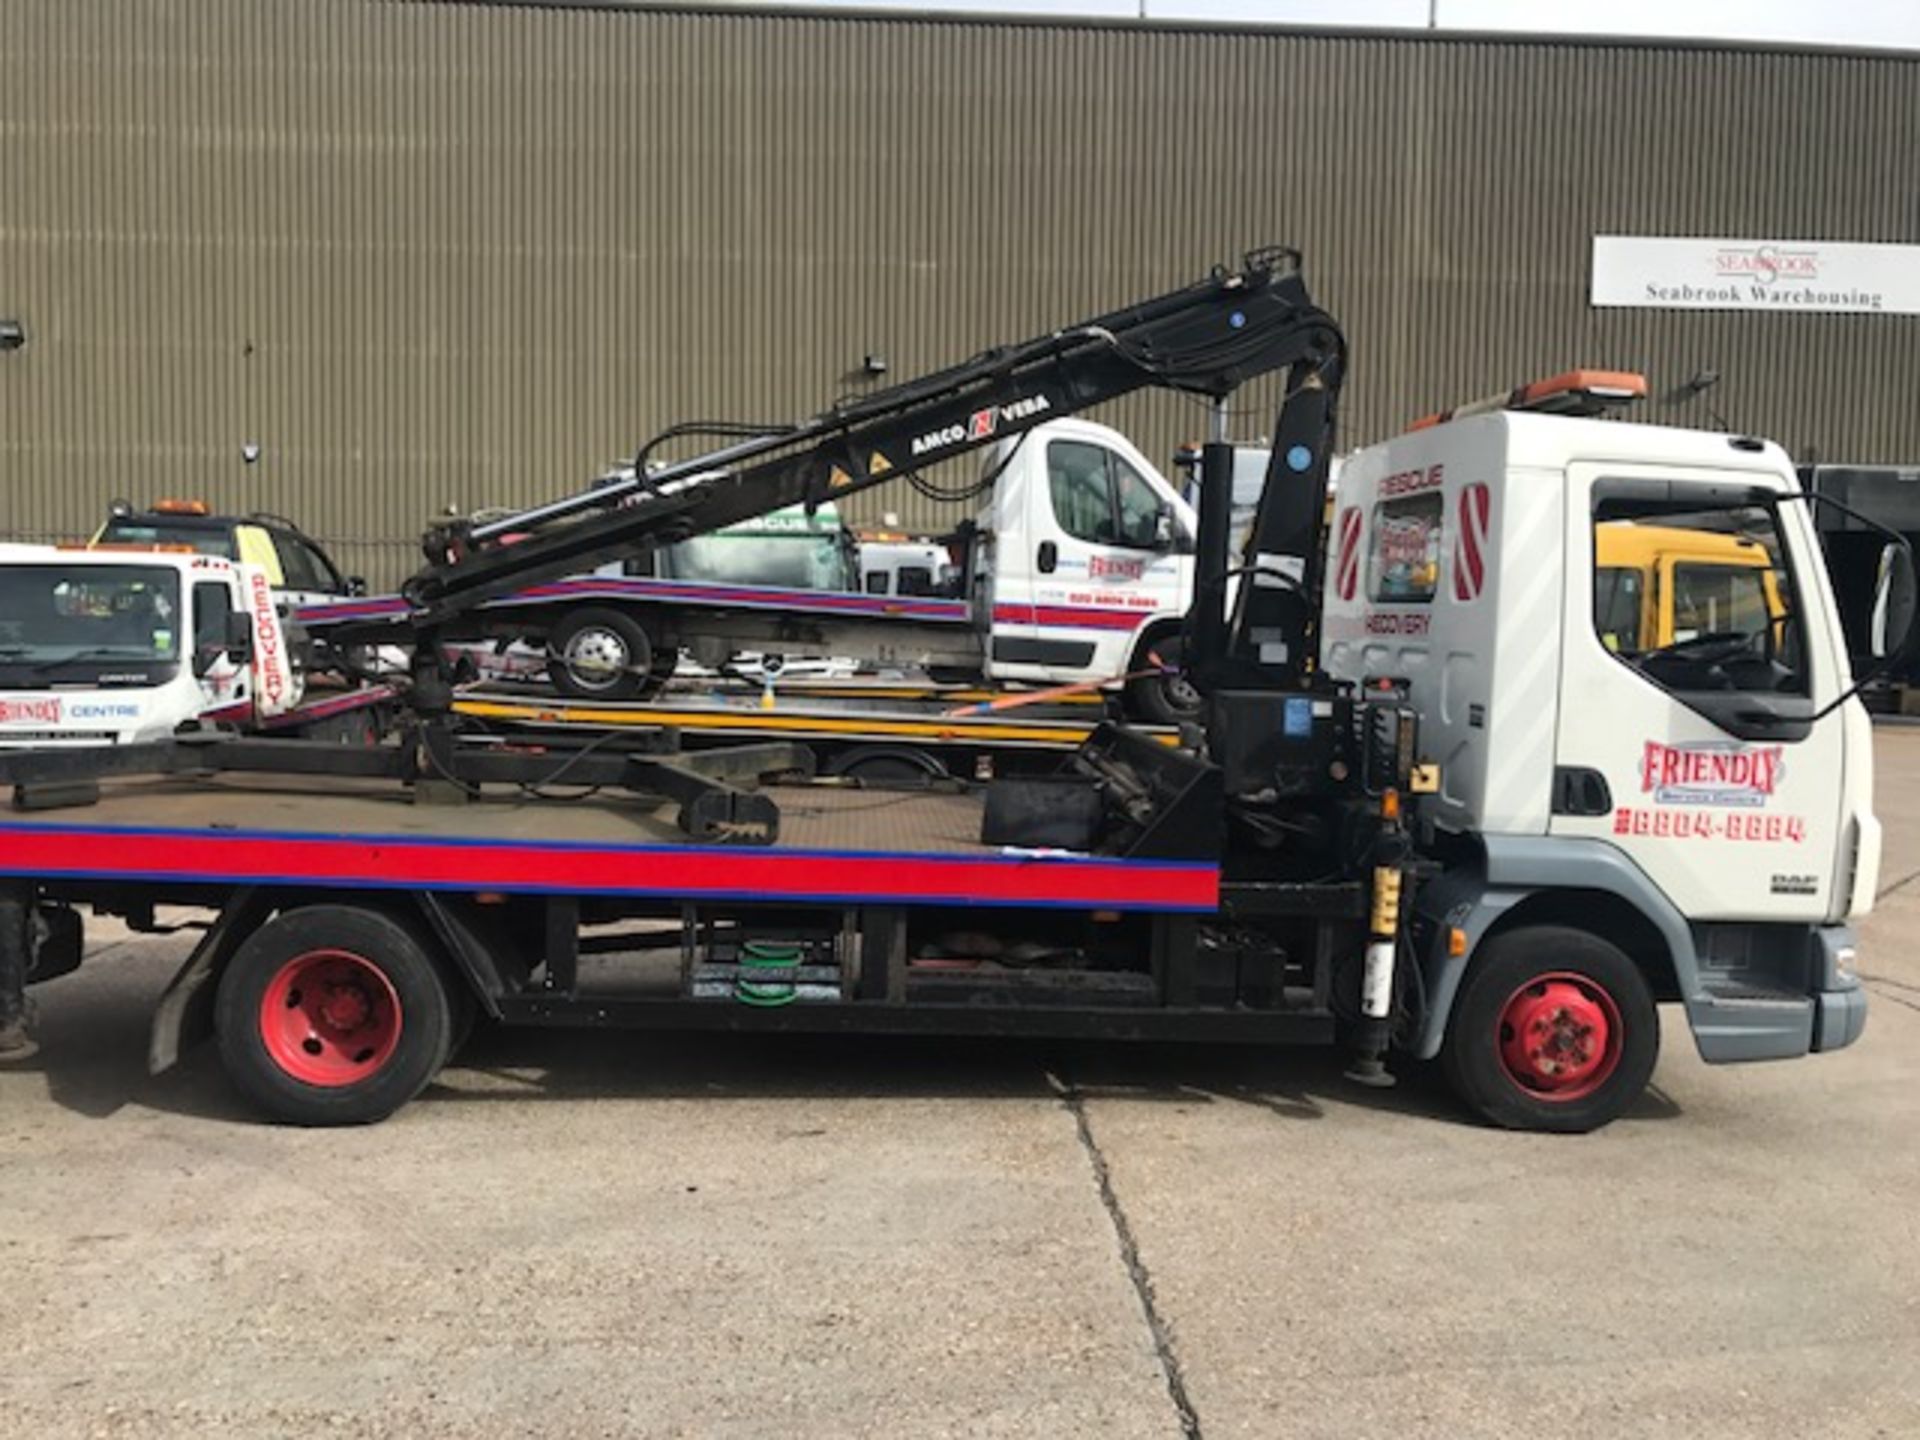 2003 DAF FA LF45.150 7.5T flat bed breakdown recovery vehicle with Amco veba hiab lift, winch and - Image 4 of 18